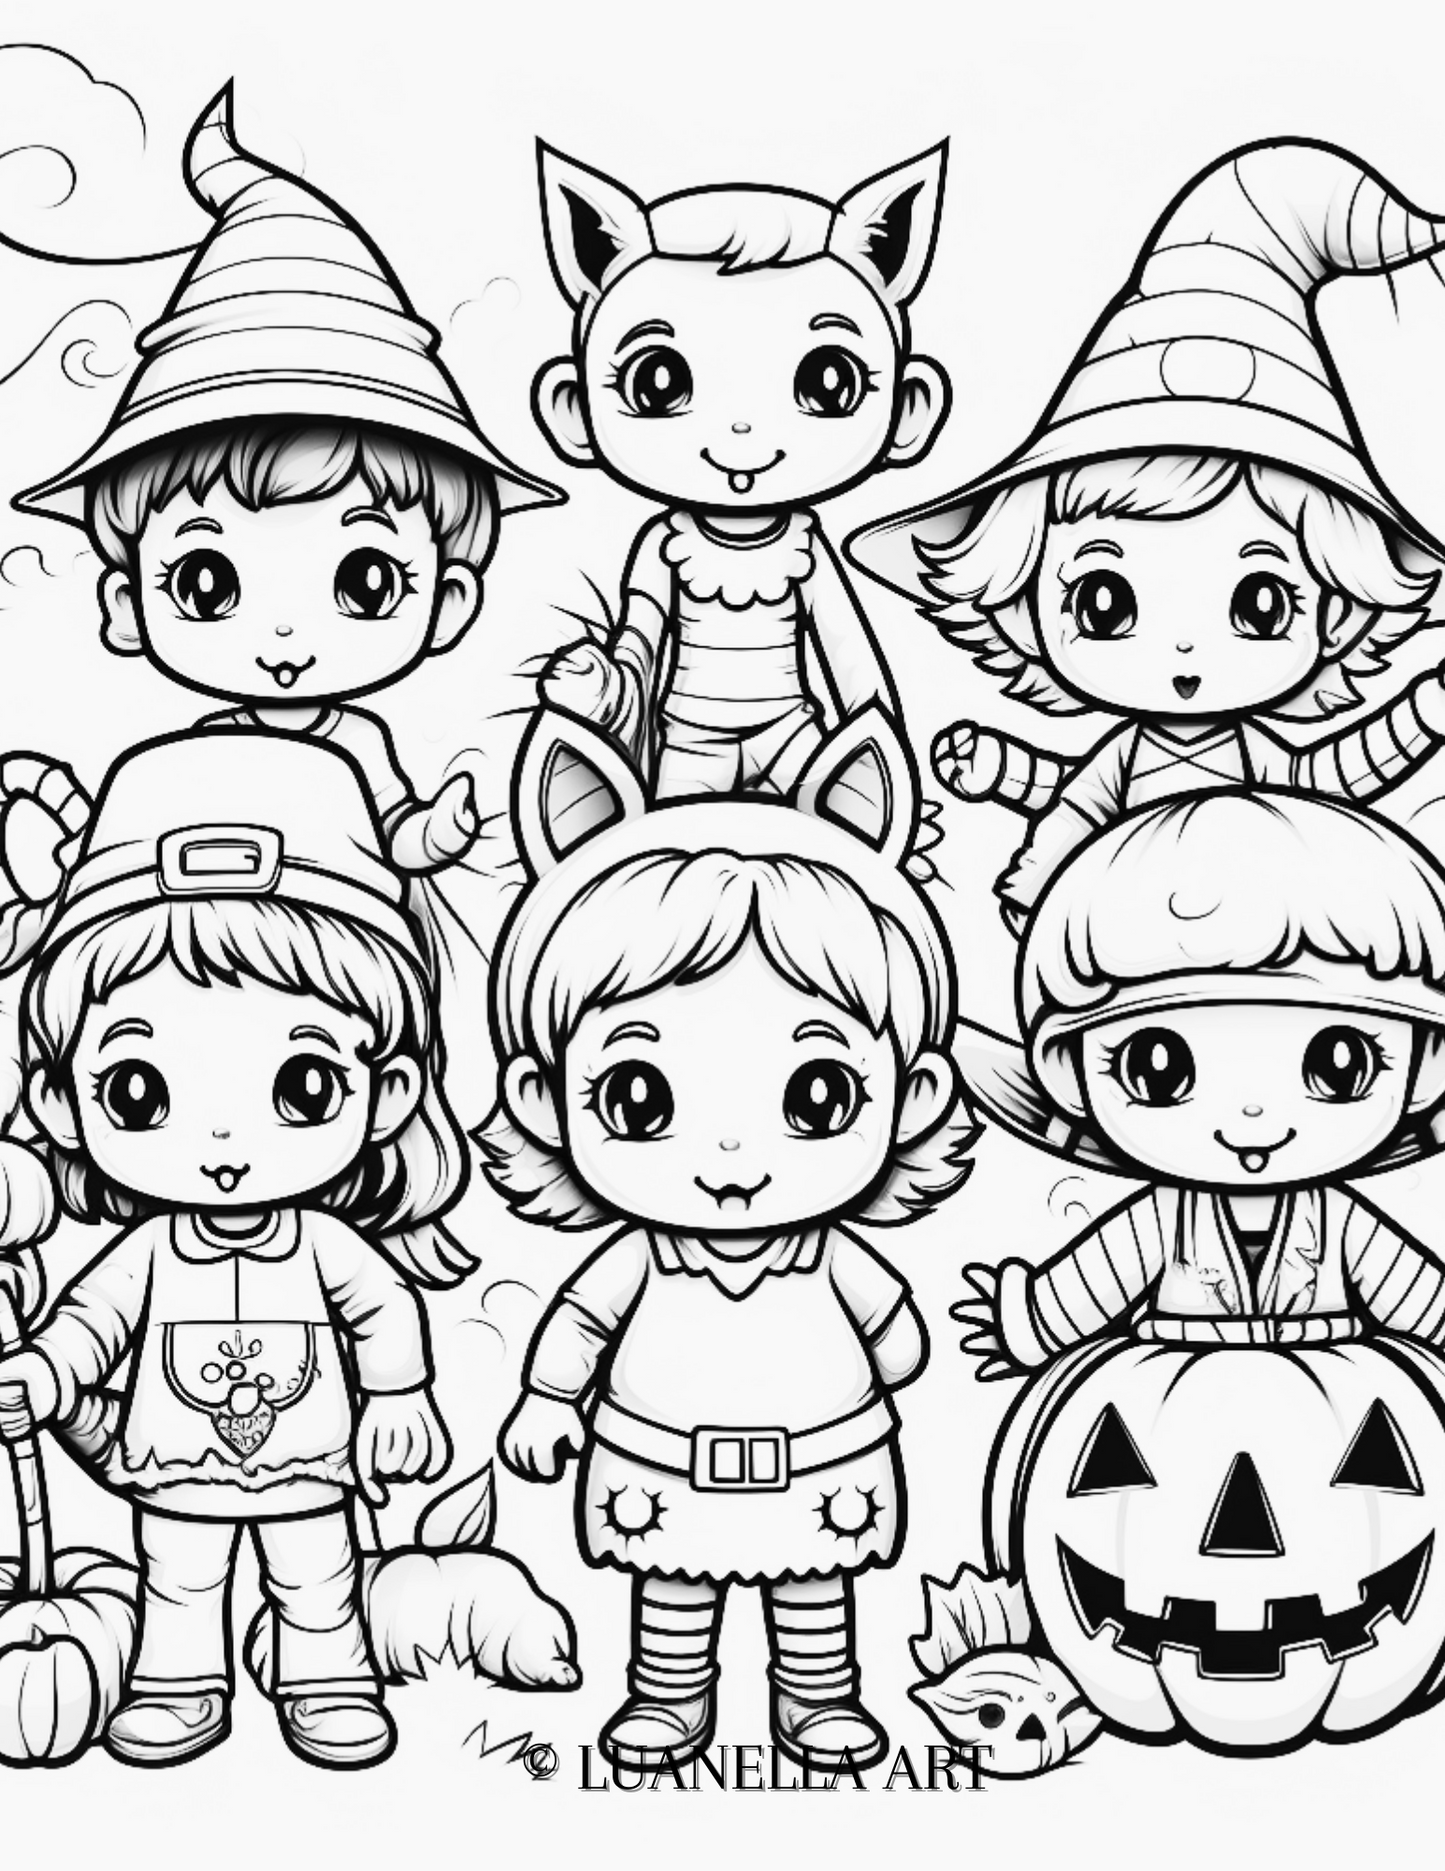 Kids ready for Trick of Treat Halloween scene | Coloring Page | Instant Digital Download